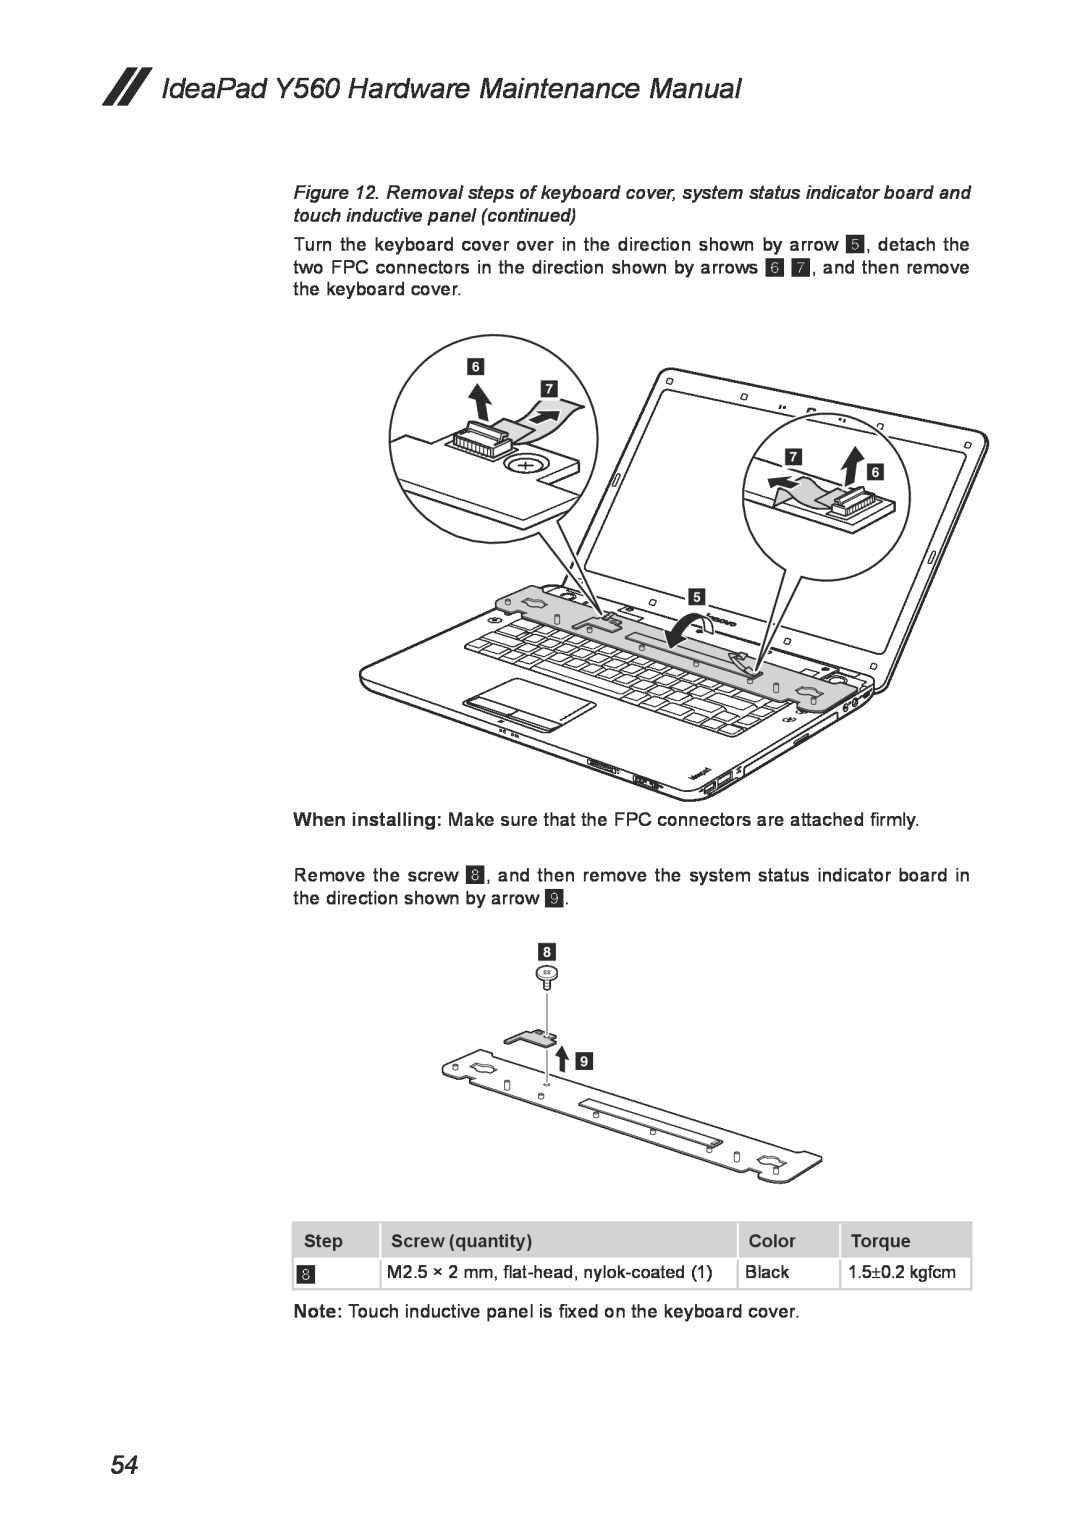 Lenovo IdeaPad Y560 Hardware Maintenance Manual, When installing Make sure that the FPC connectors are attached firmly 